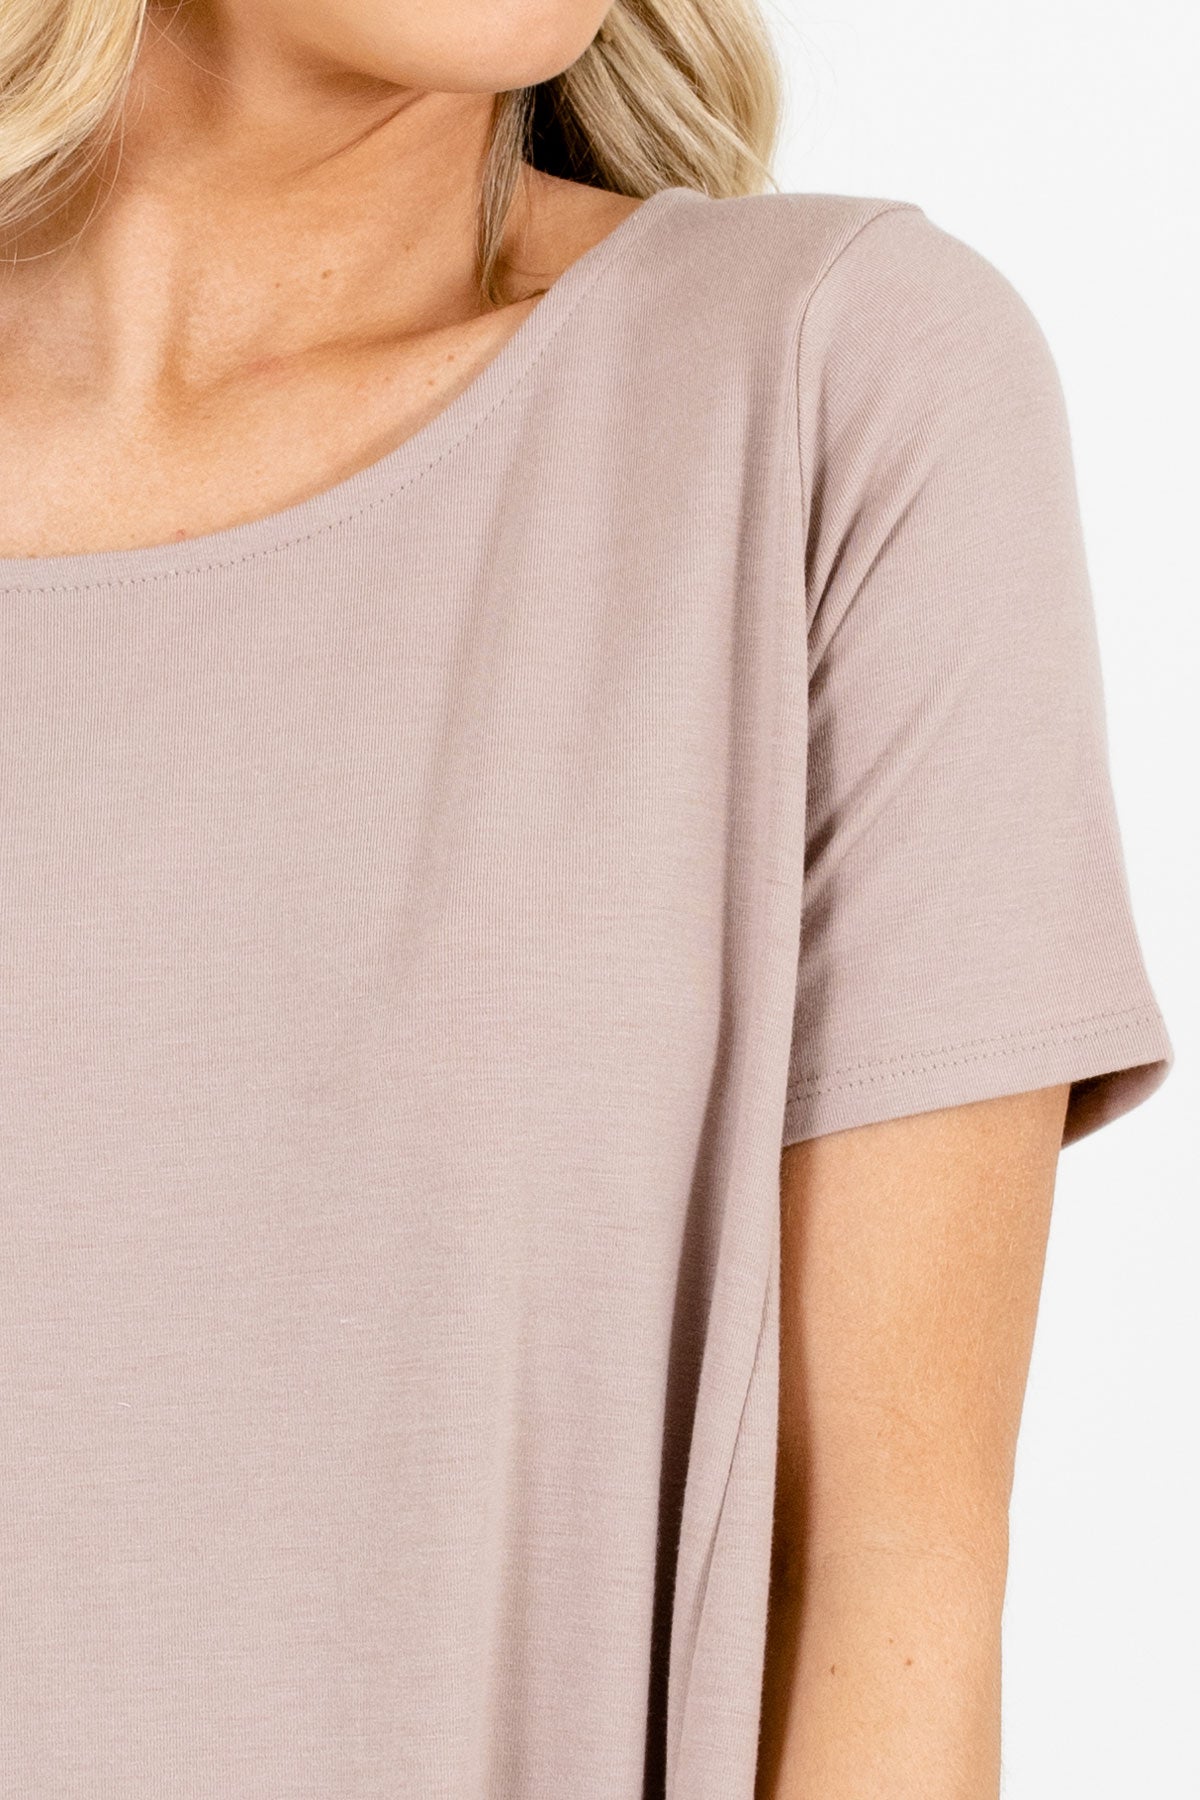 Taupe Brown Cute and Comfortable Boutique Tops for Women 